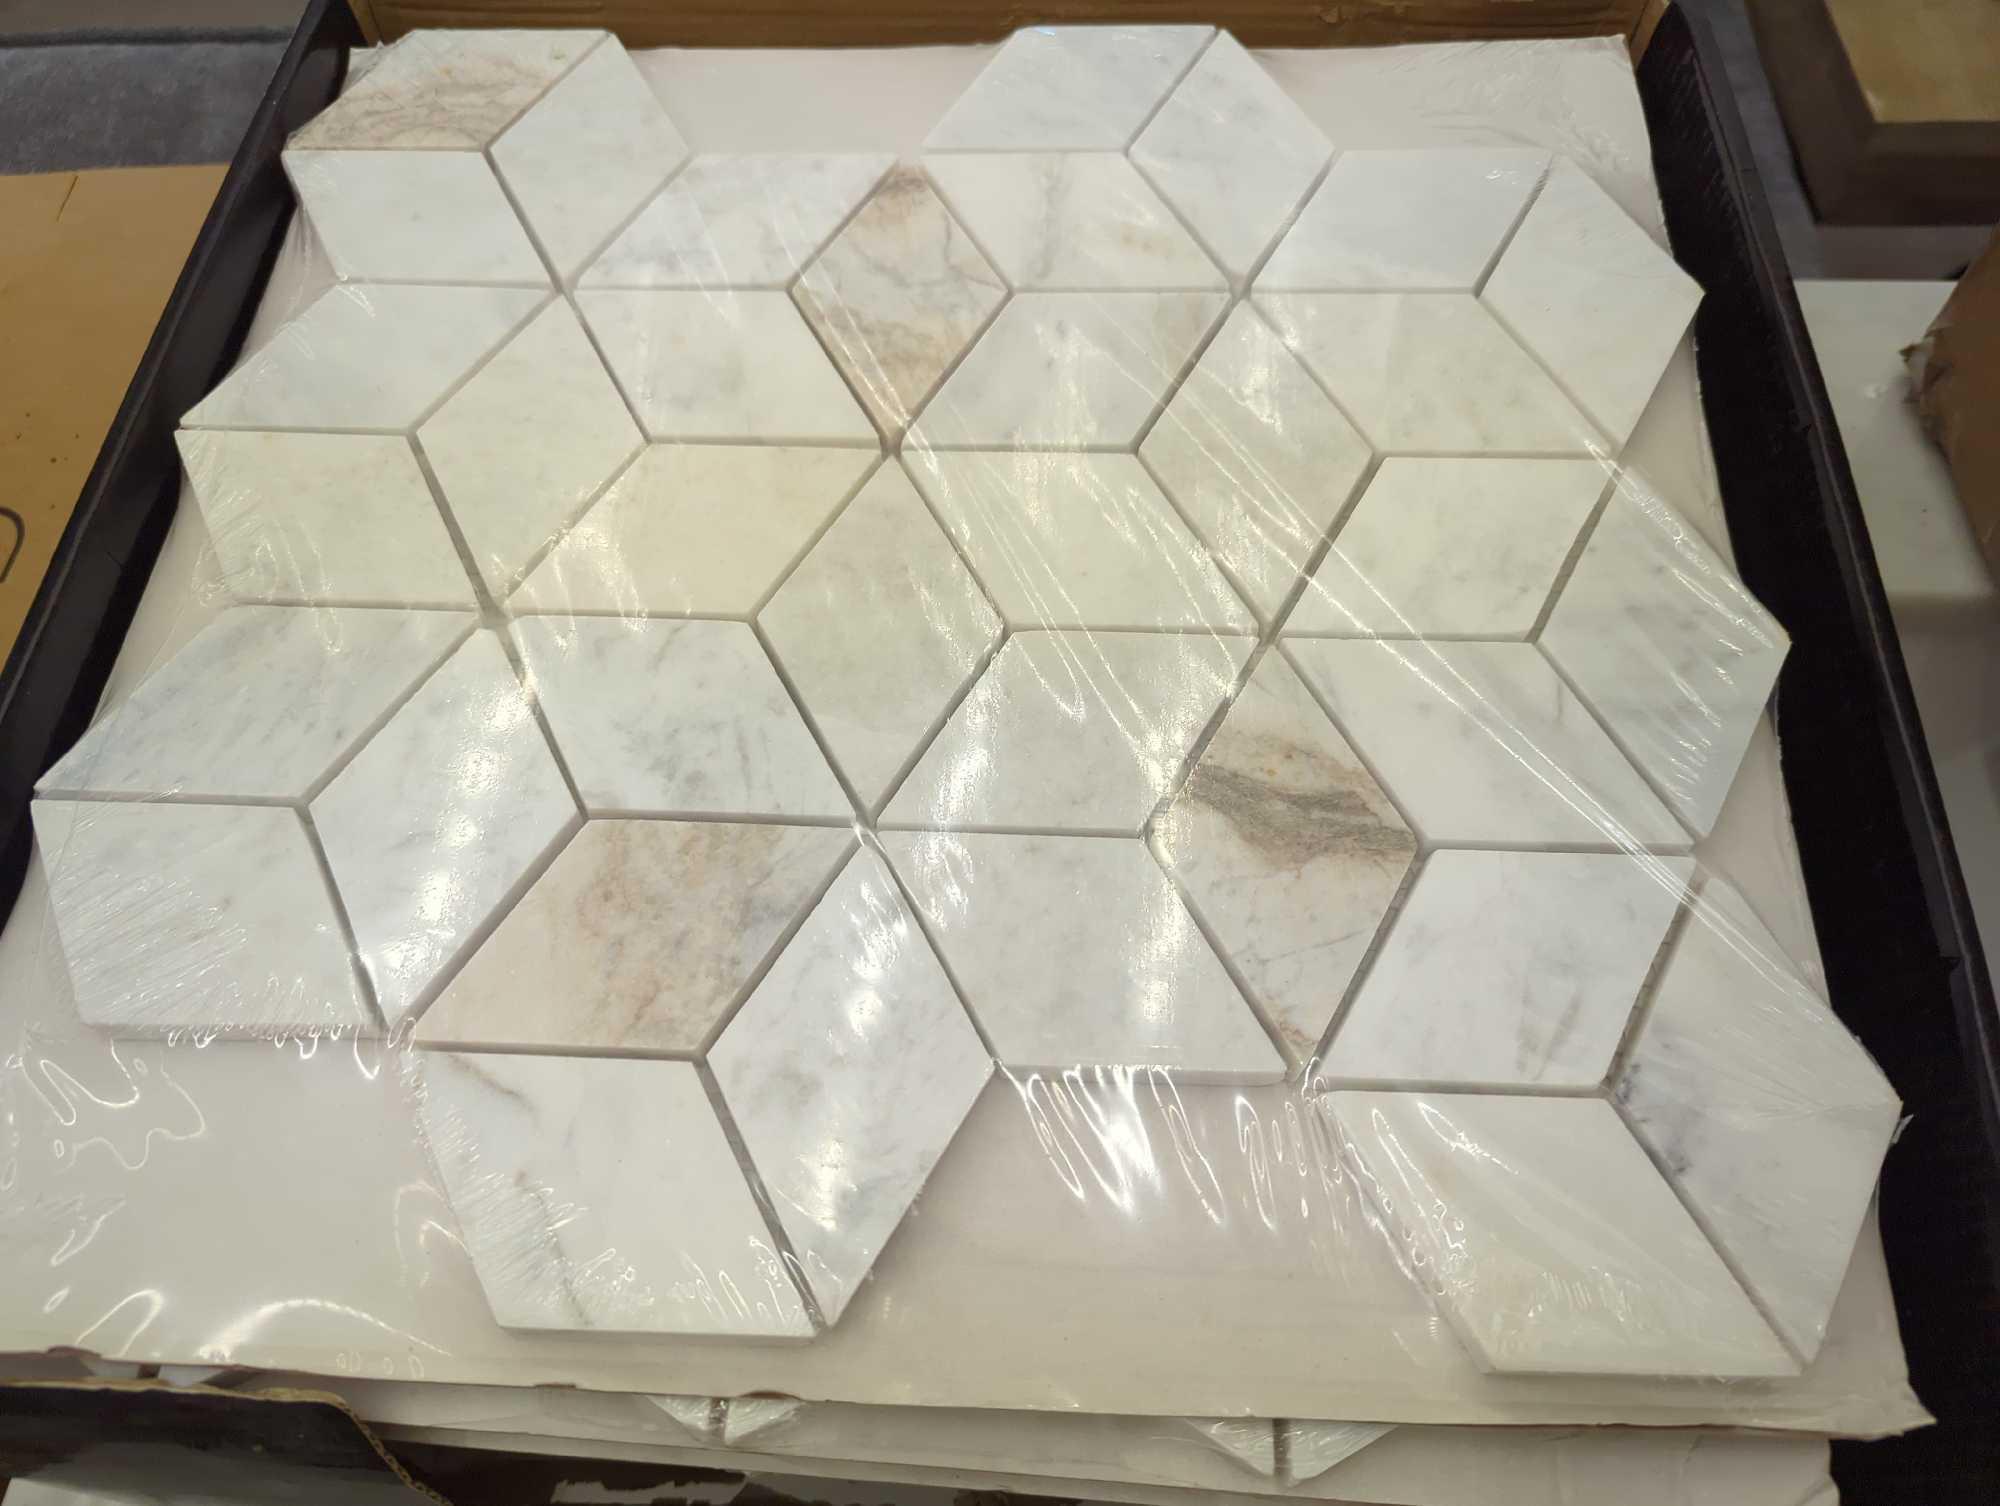 Lot of 3 Cases of MSI Arabescato Carrara Venato Cube 12 in. x 12 in. Mixed Marble Mesh-Mounted